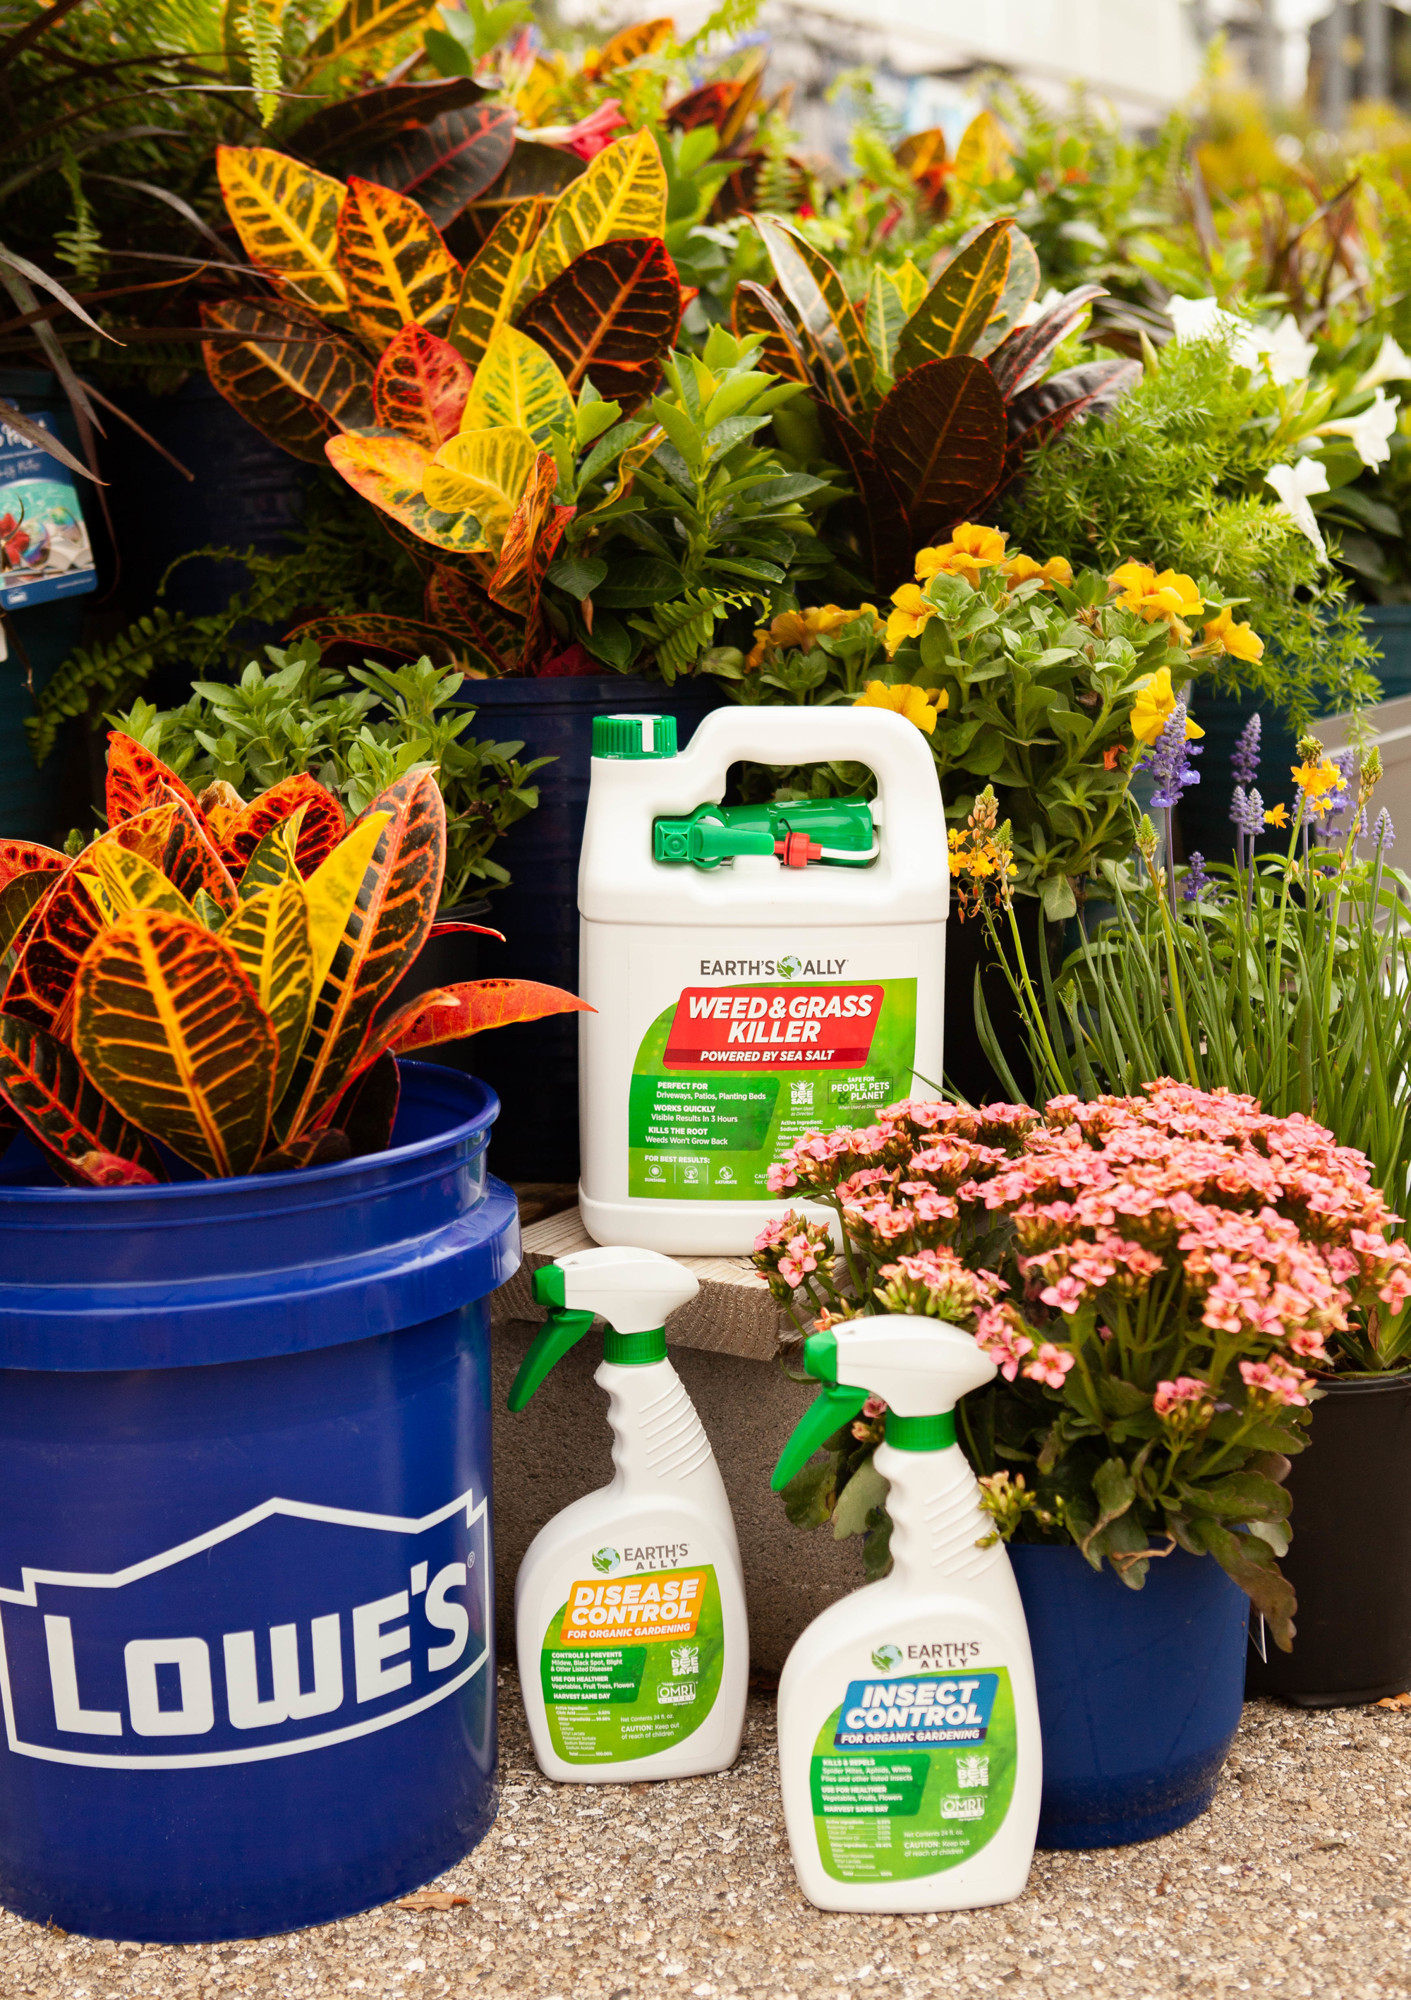 Courtesy. Beginning in May 2021, the complete line of the Sarasota-based company's organic gardening products, Insect Control, Disease Control and Weed & Grass Killer will be available at more than 500 Lowe’s retail stores.